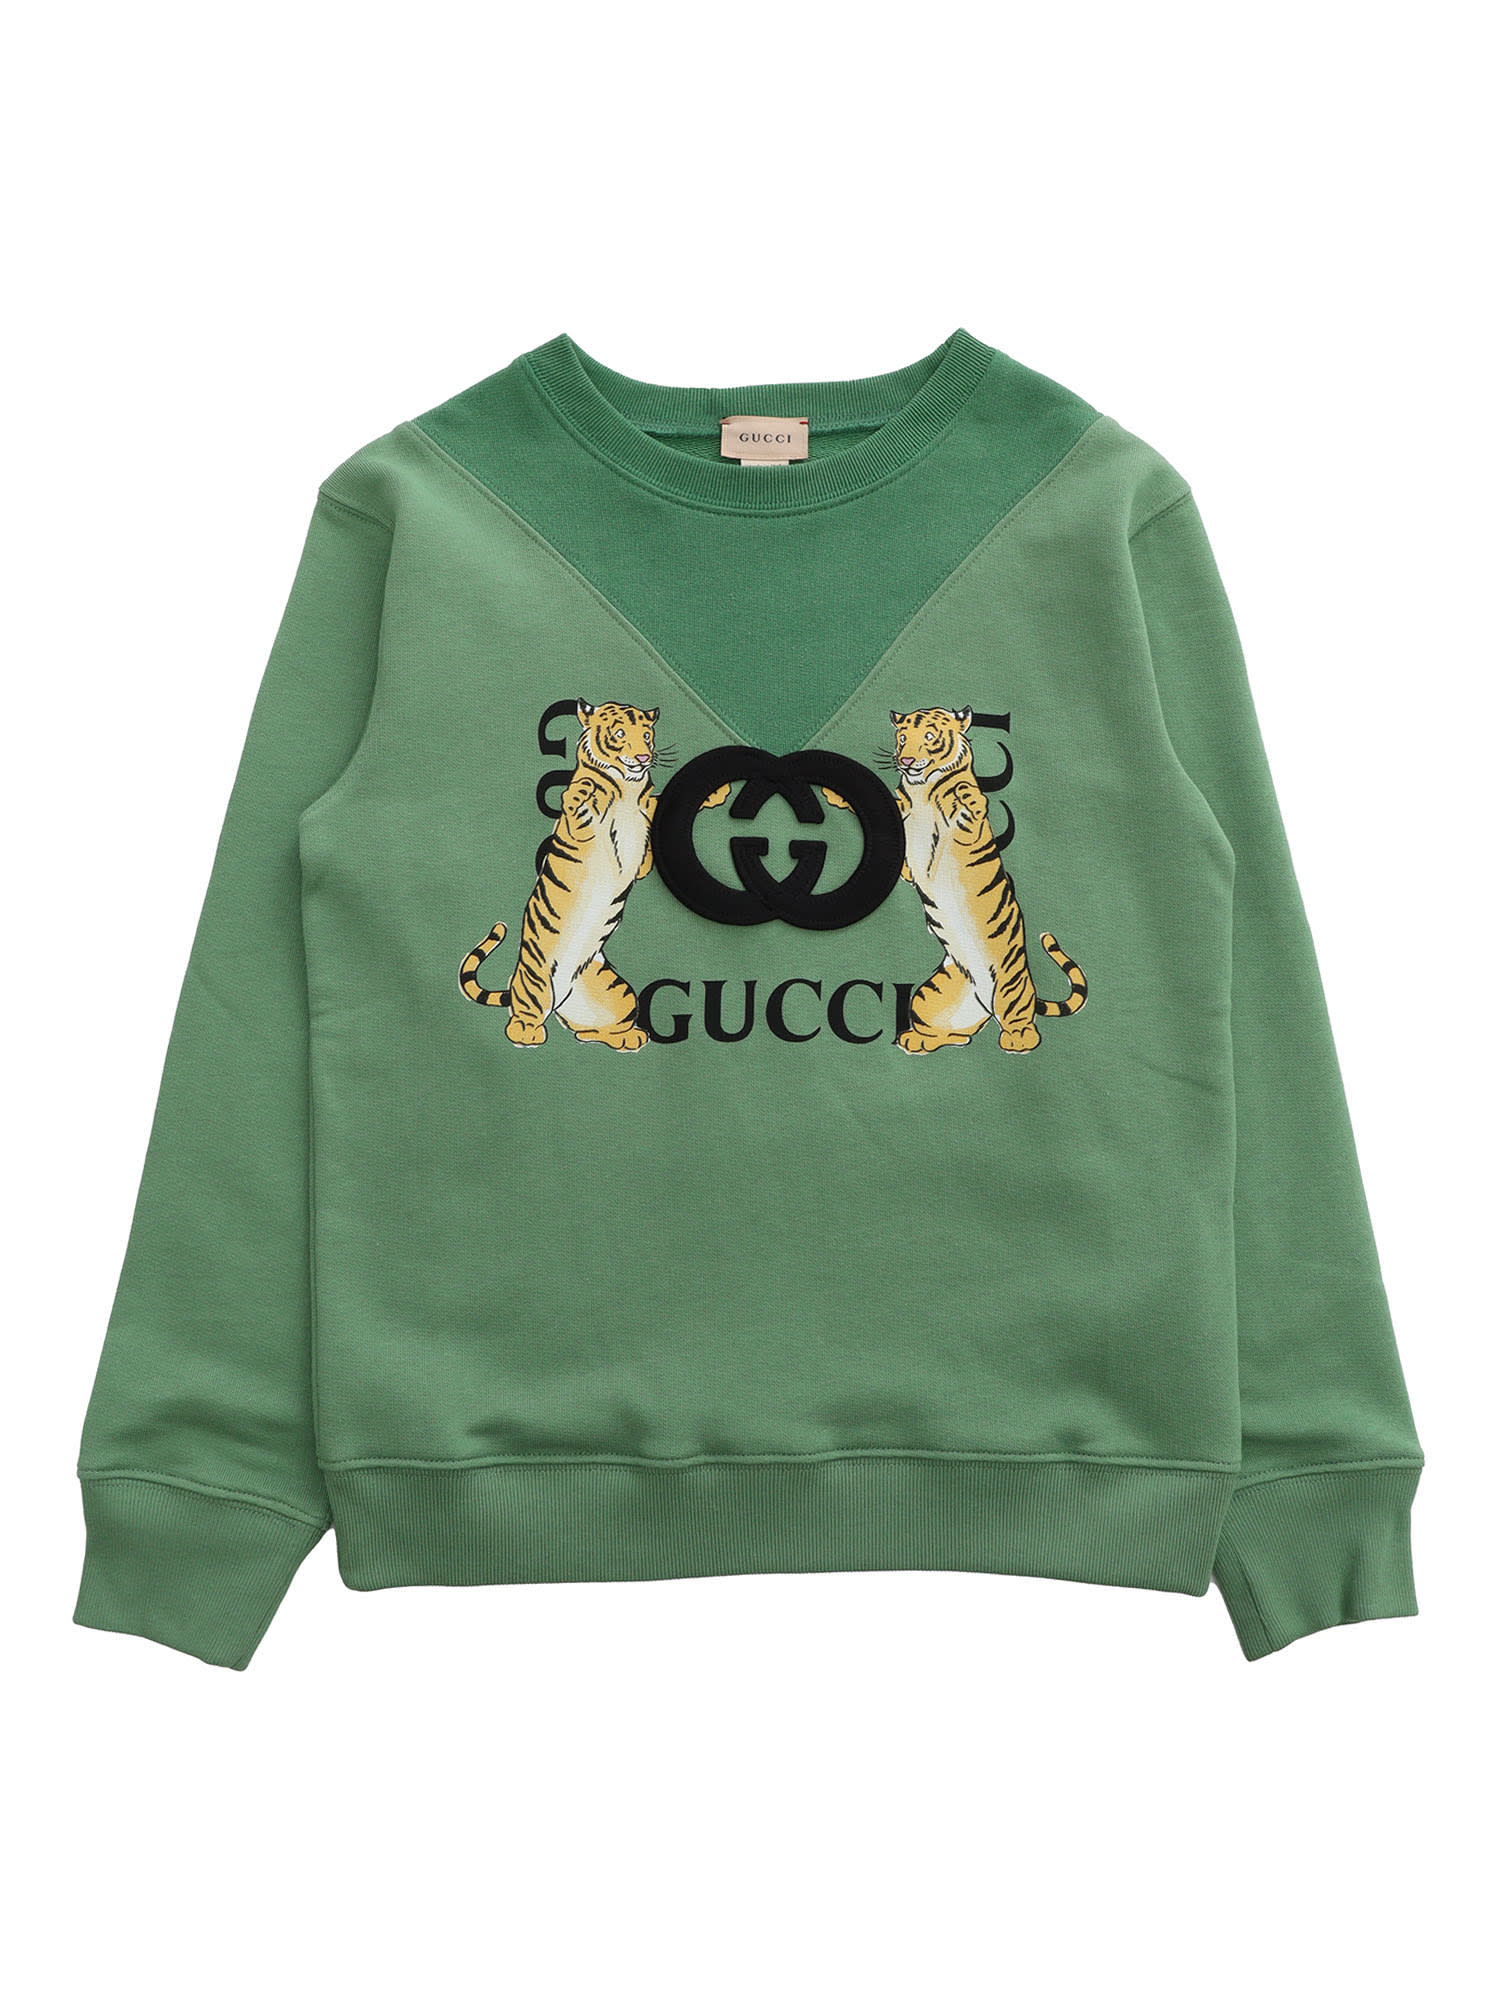 GUCCI SWEATSHIRT WITH PATCHES